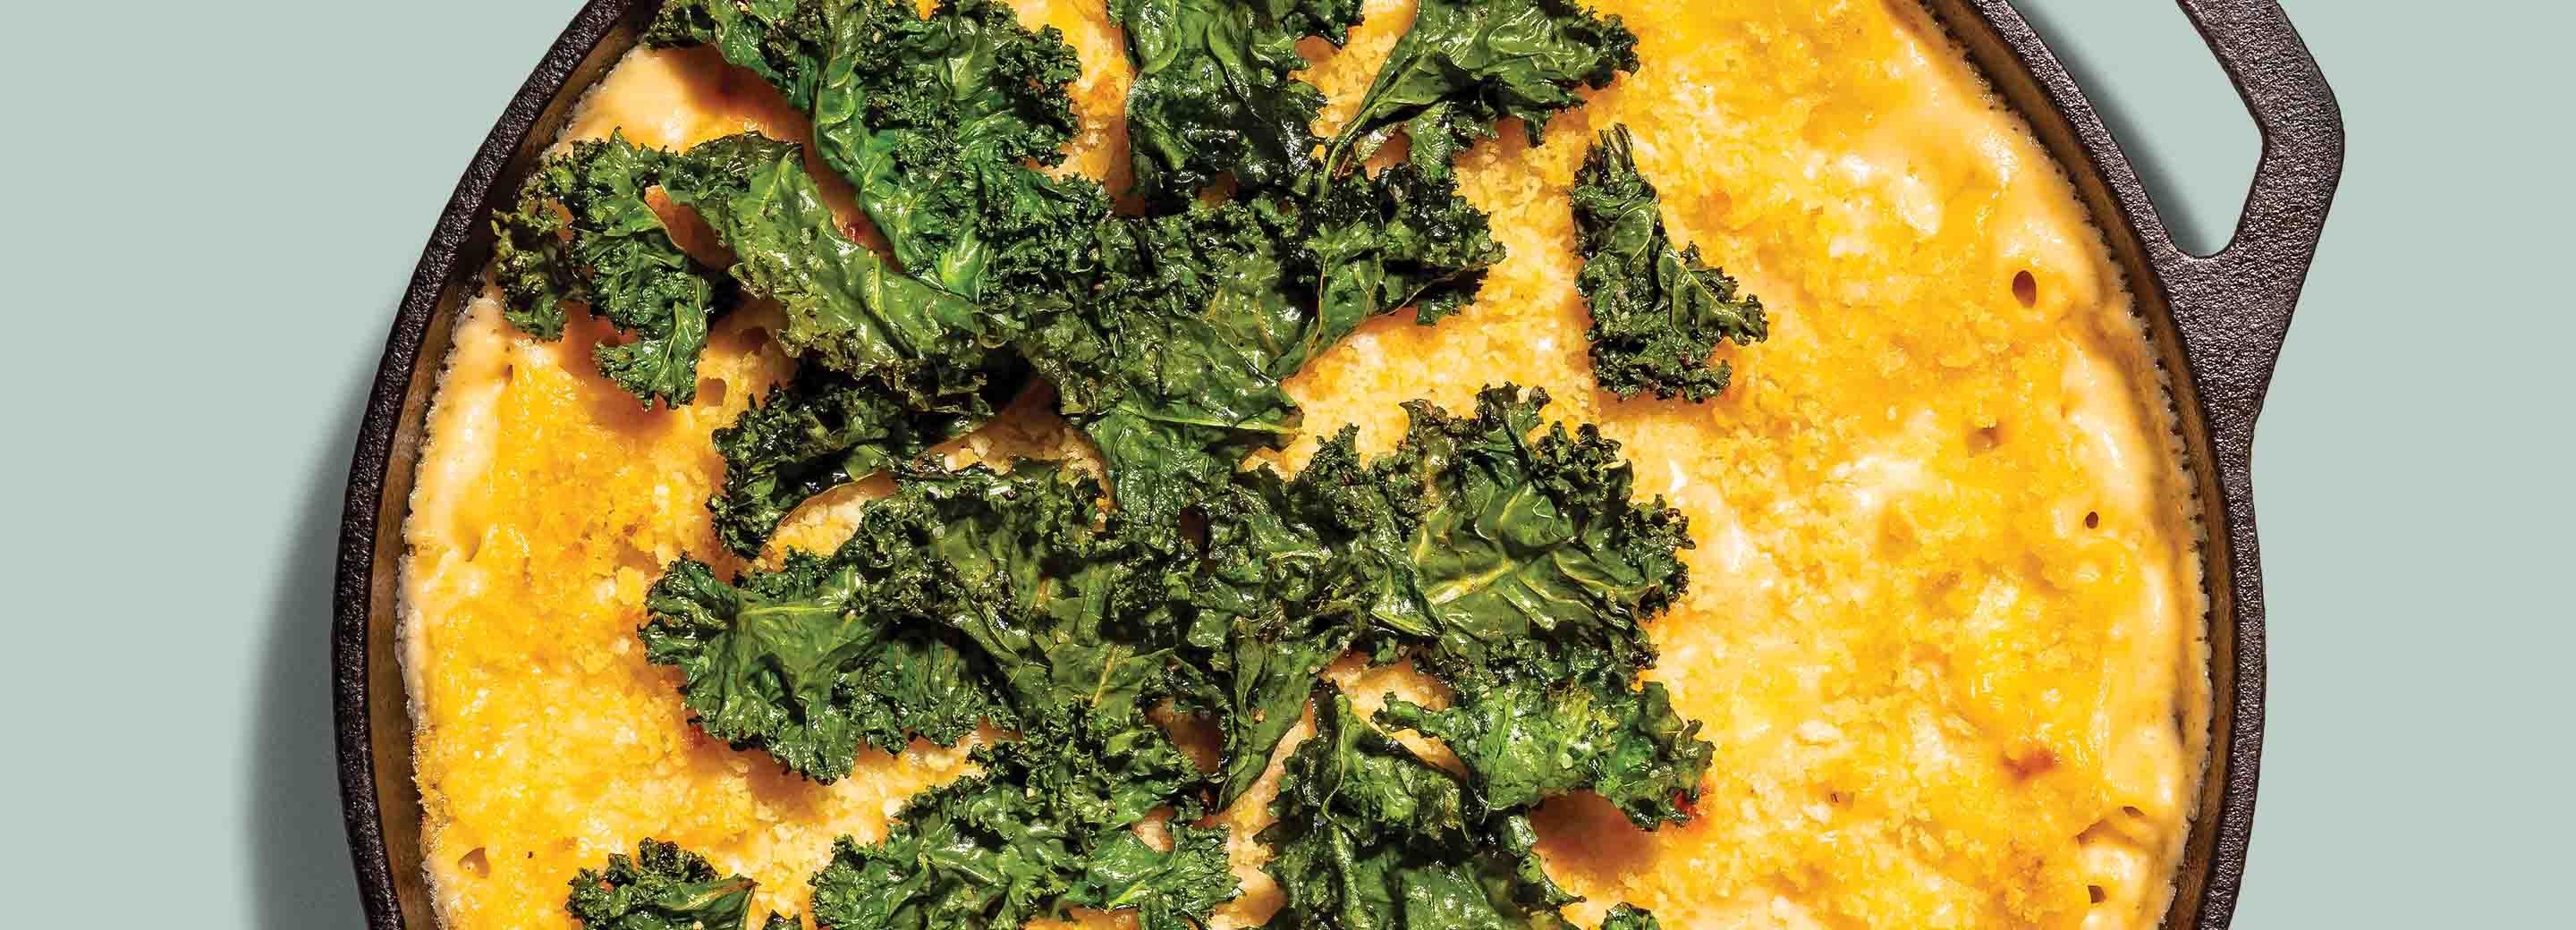 Mac & Cheese with Kale Chips